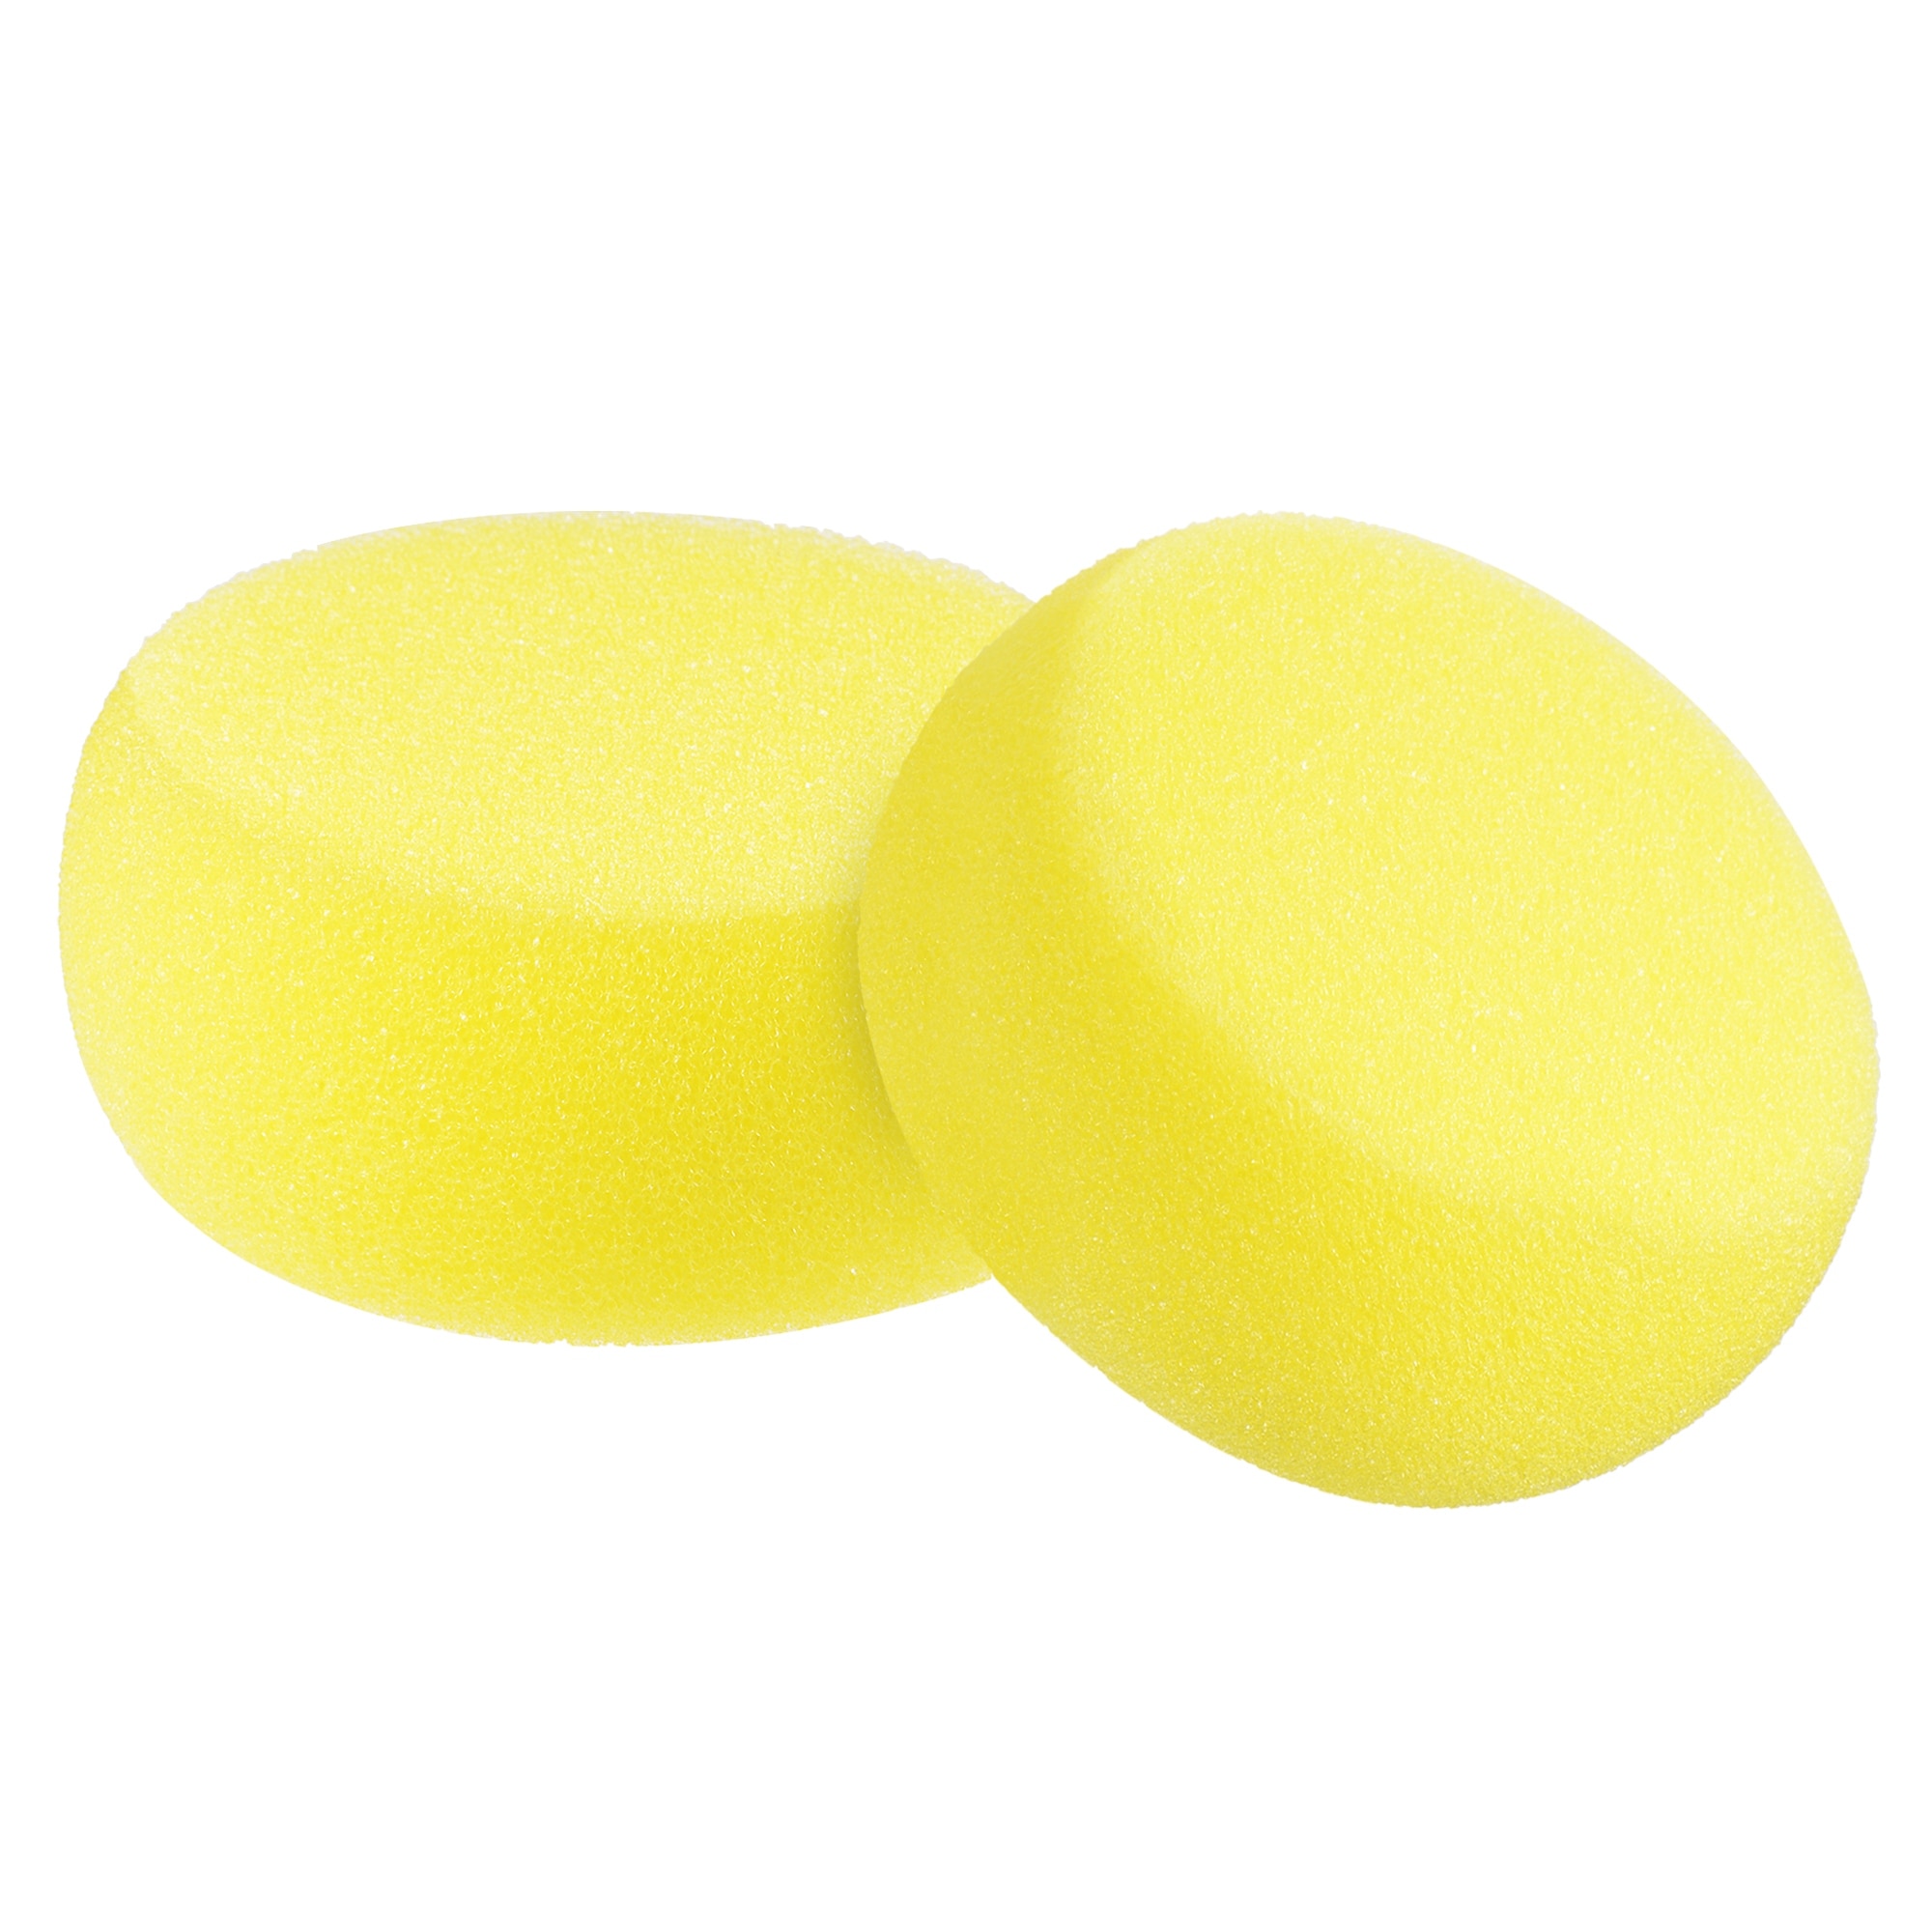 Knockdown Texture Sponge 2.8 Faux Painting Supply Wall Texturing 6pcs - Yellow